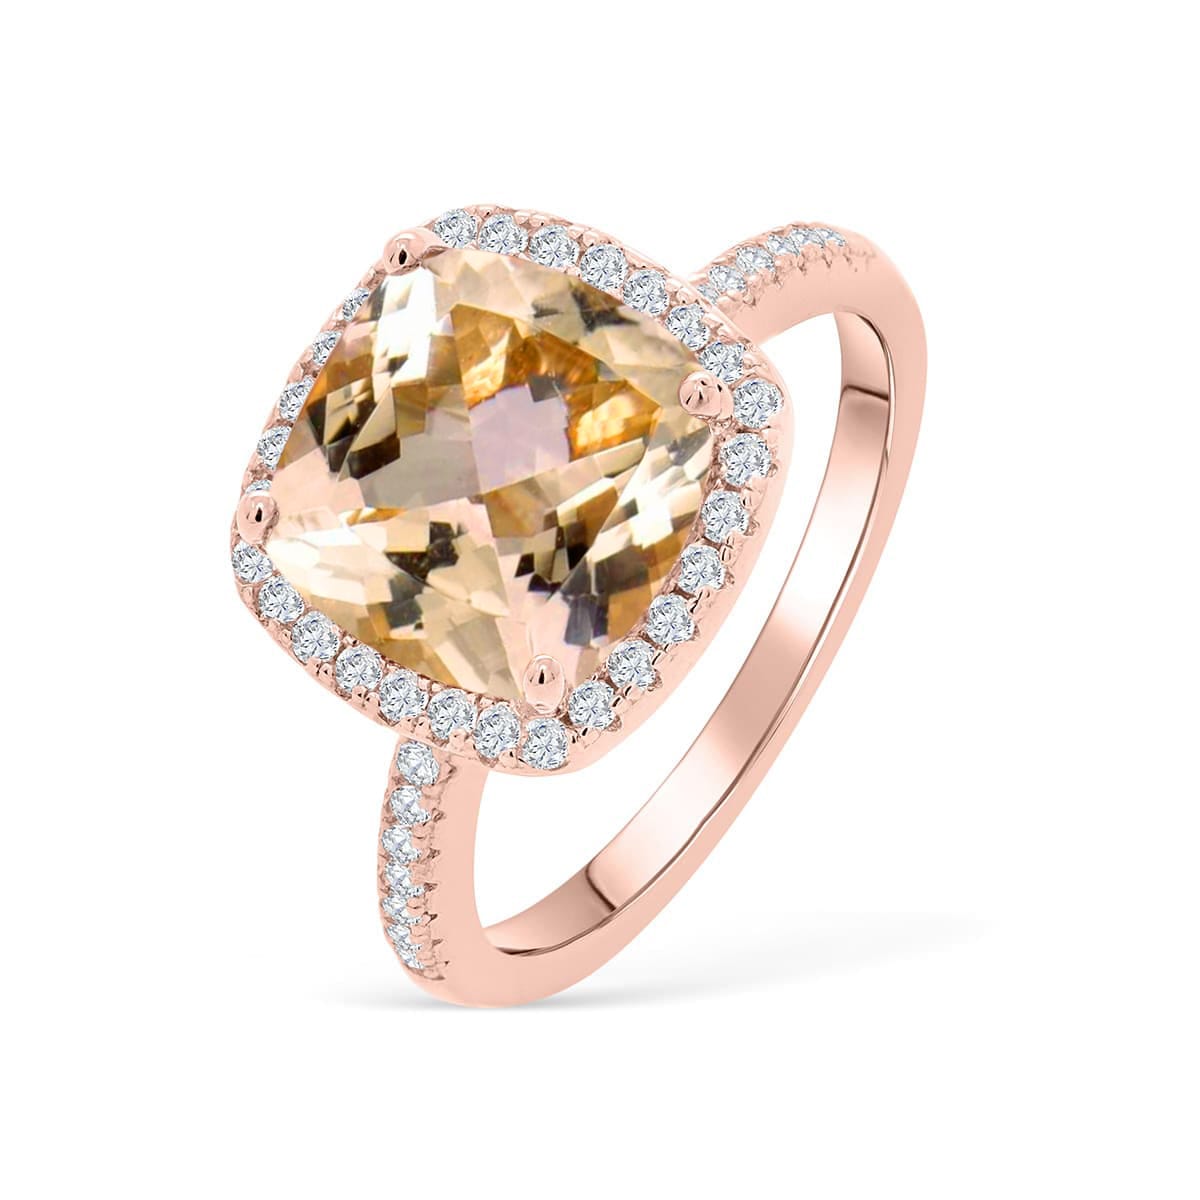 the lovely morganite halo engagement ring